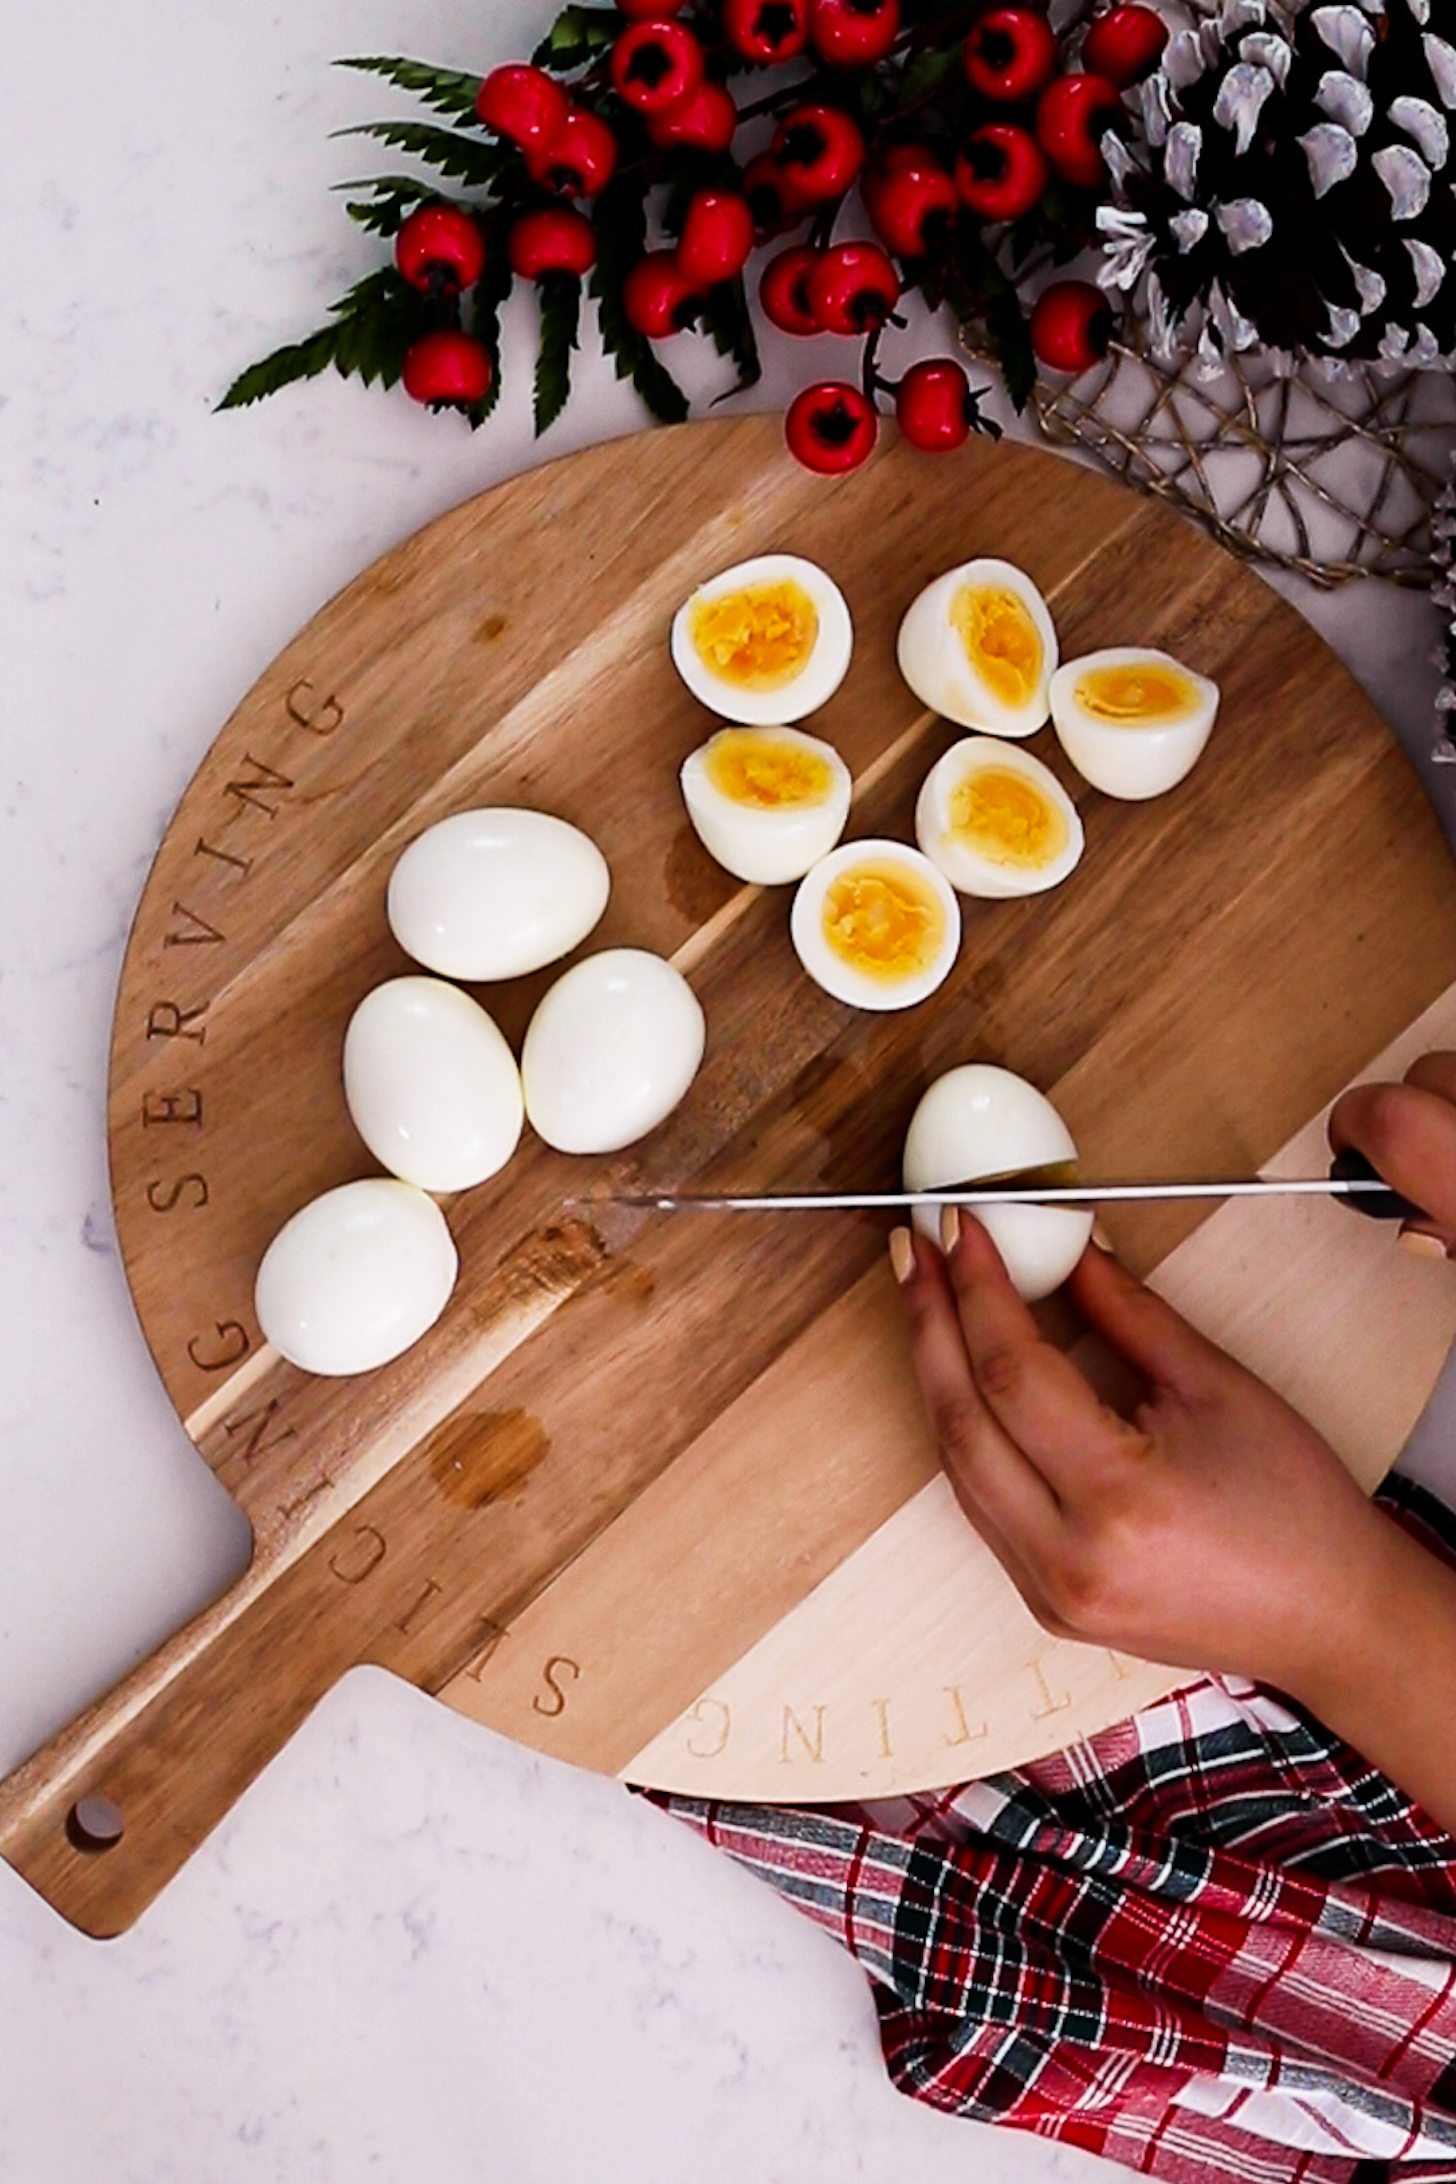 A hand is seen slicing a boiled egg in half with a knife, surrounded by a collection of more boiled eggs.